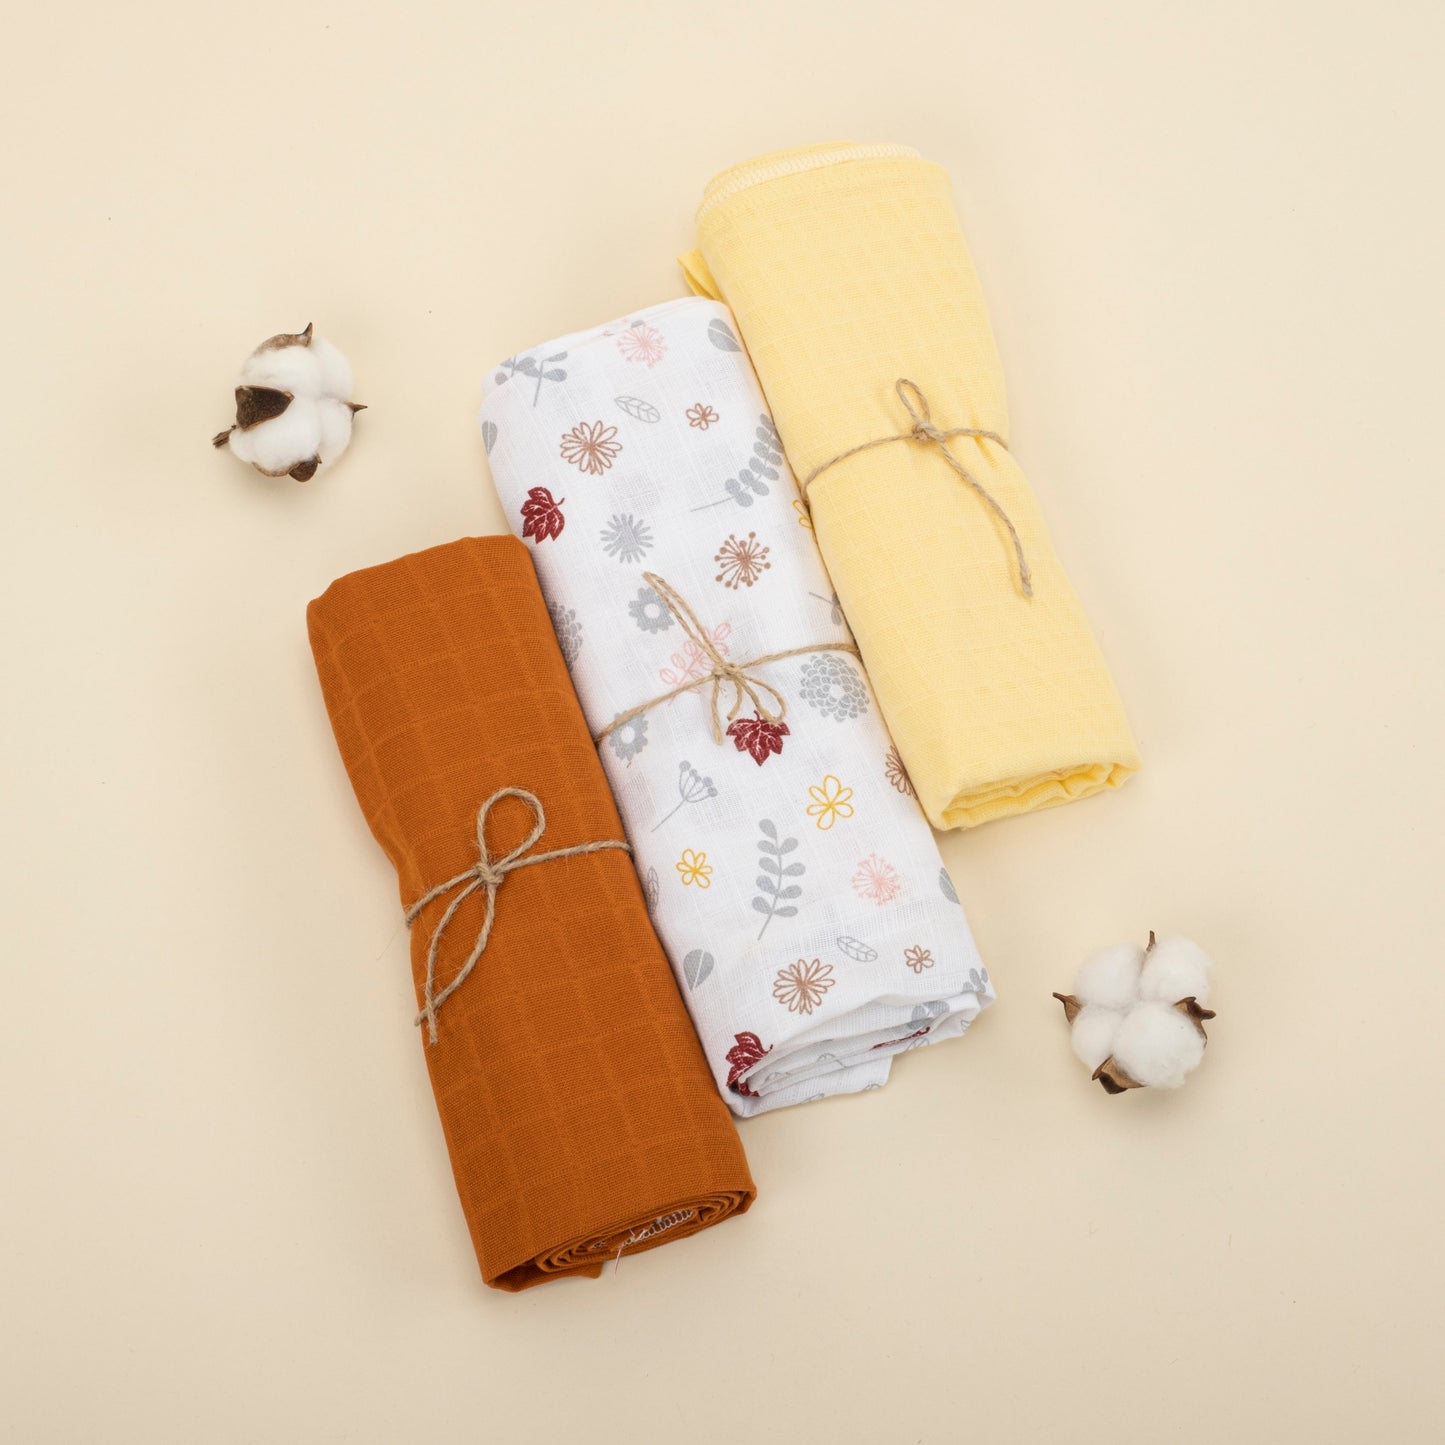 3 Piece Muslin Cover Set - Tile / Spring Flower / Yellow